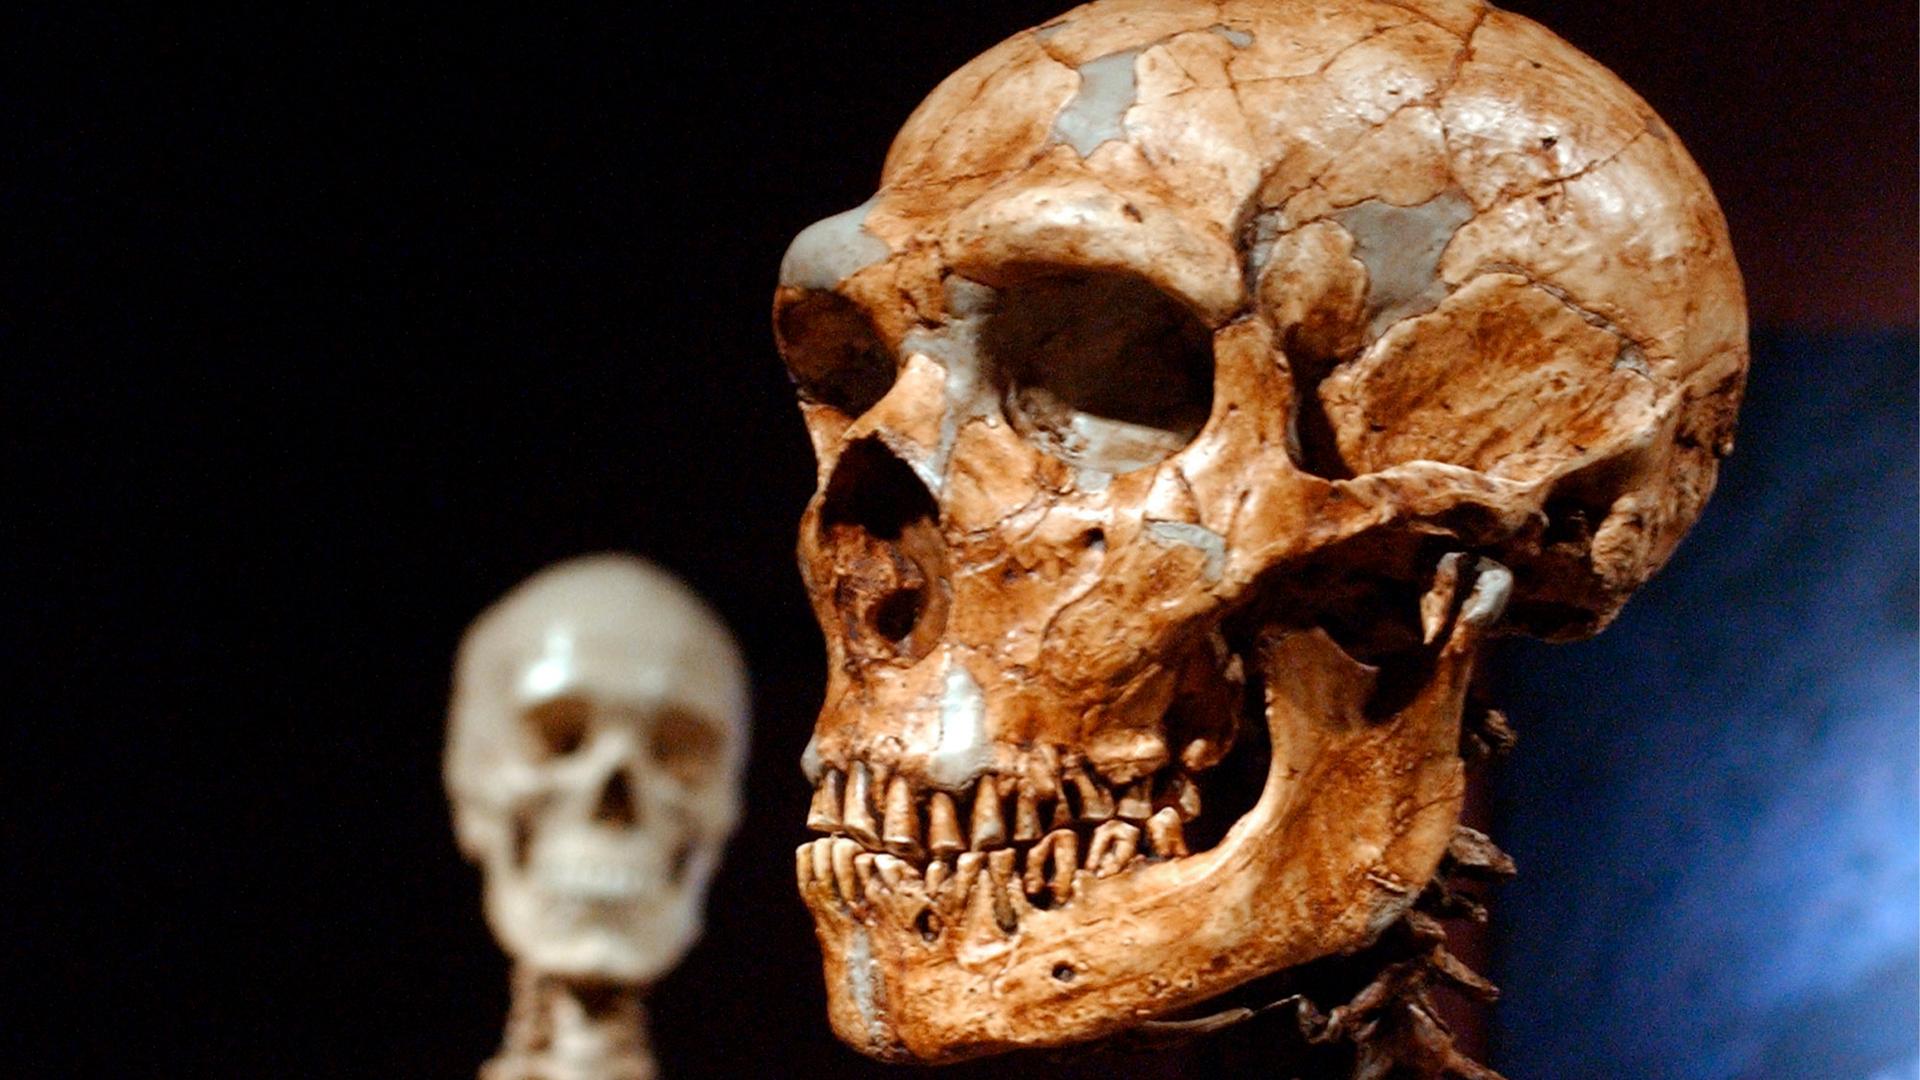 A reconstructed Neanderthal skeleton, right, and a modern human skeleton on display at the Museum of Natural History in New York